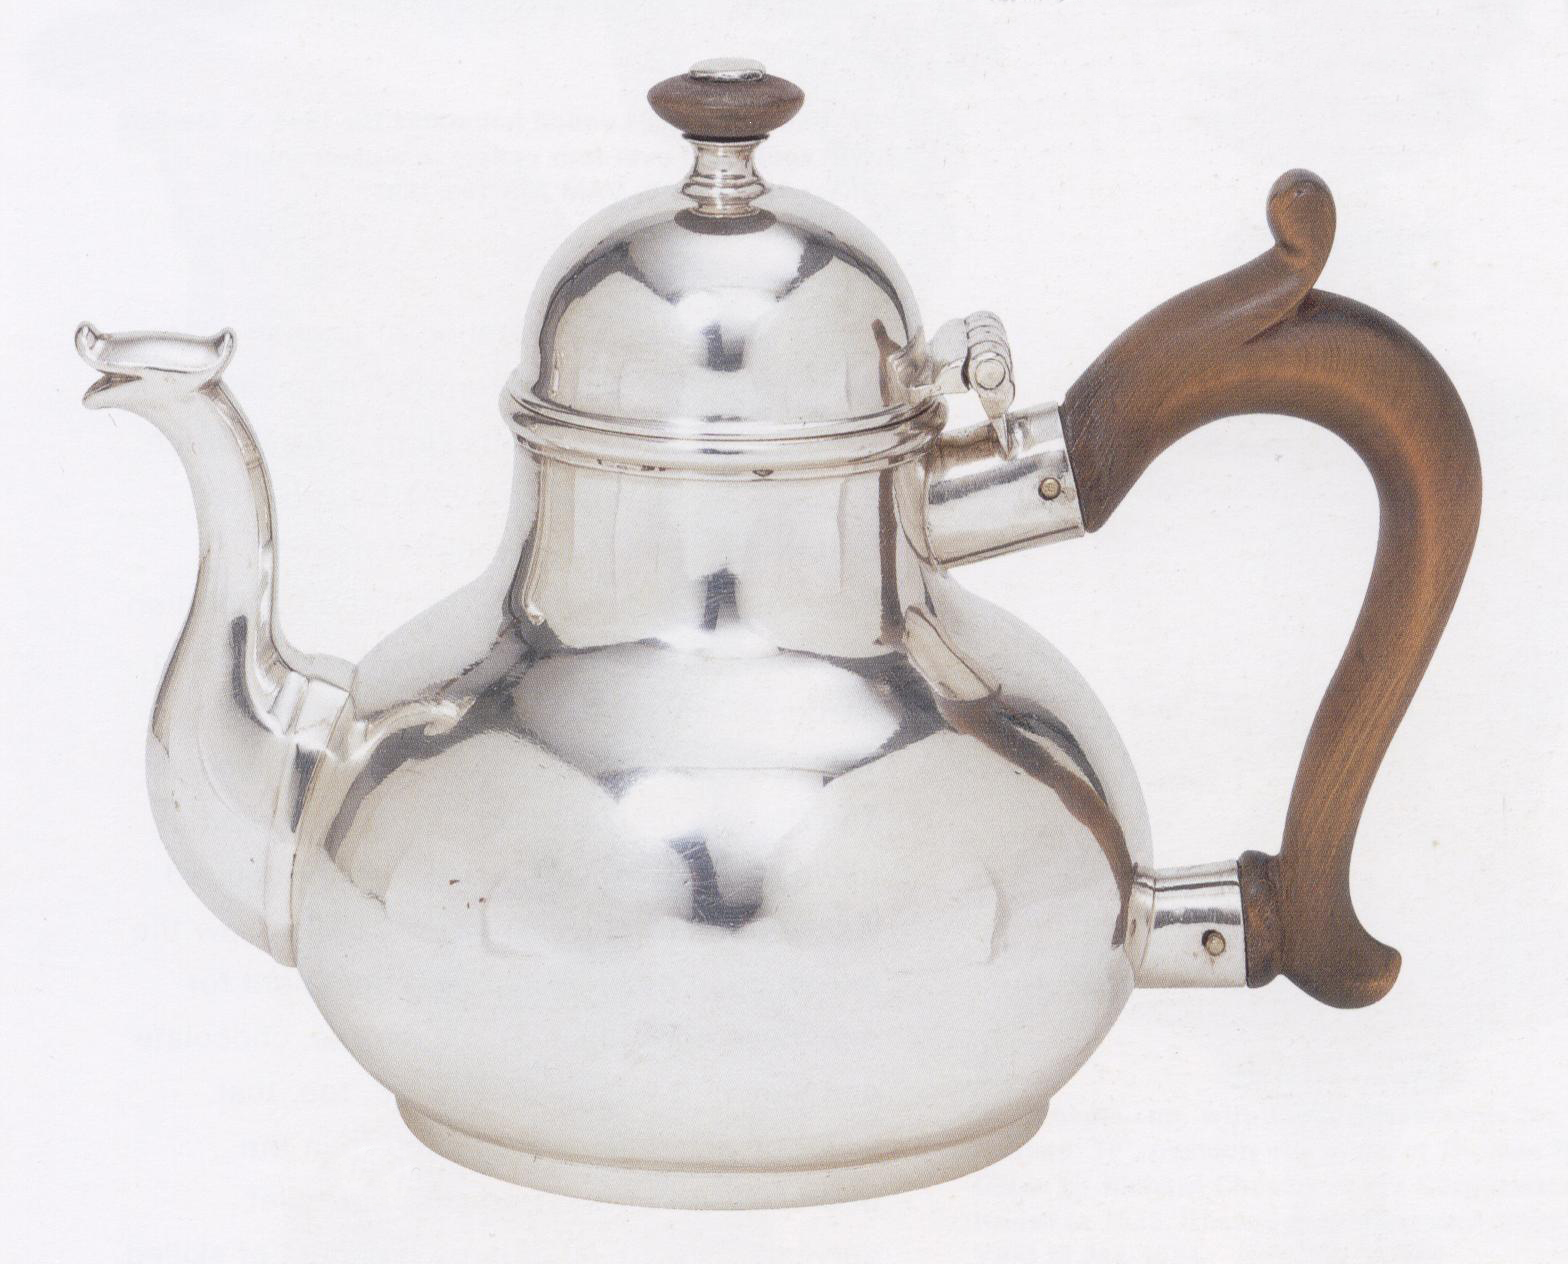 An English pear-shaped teapot in silver, with a wooden handle